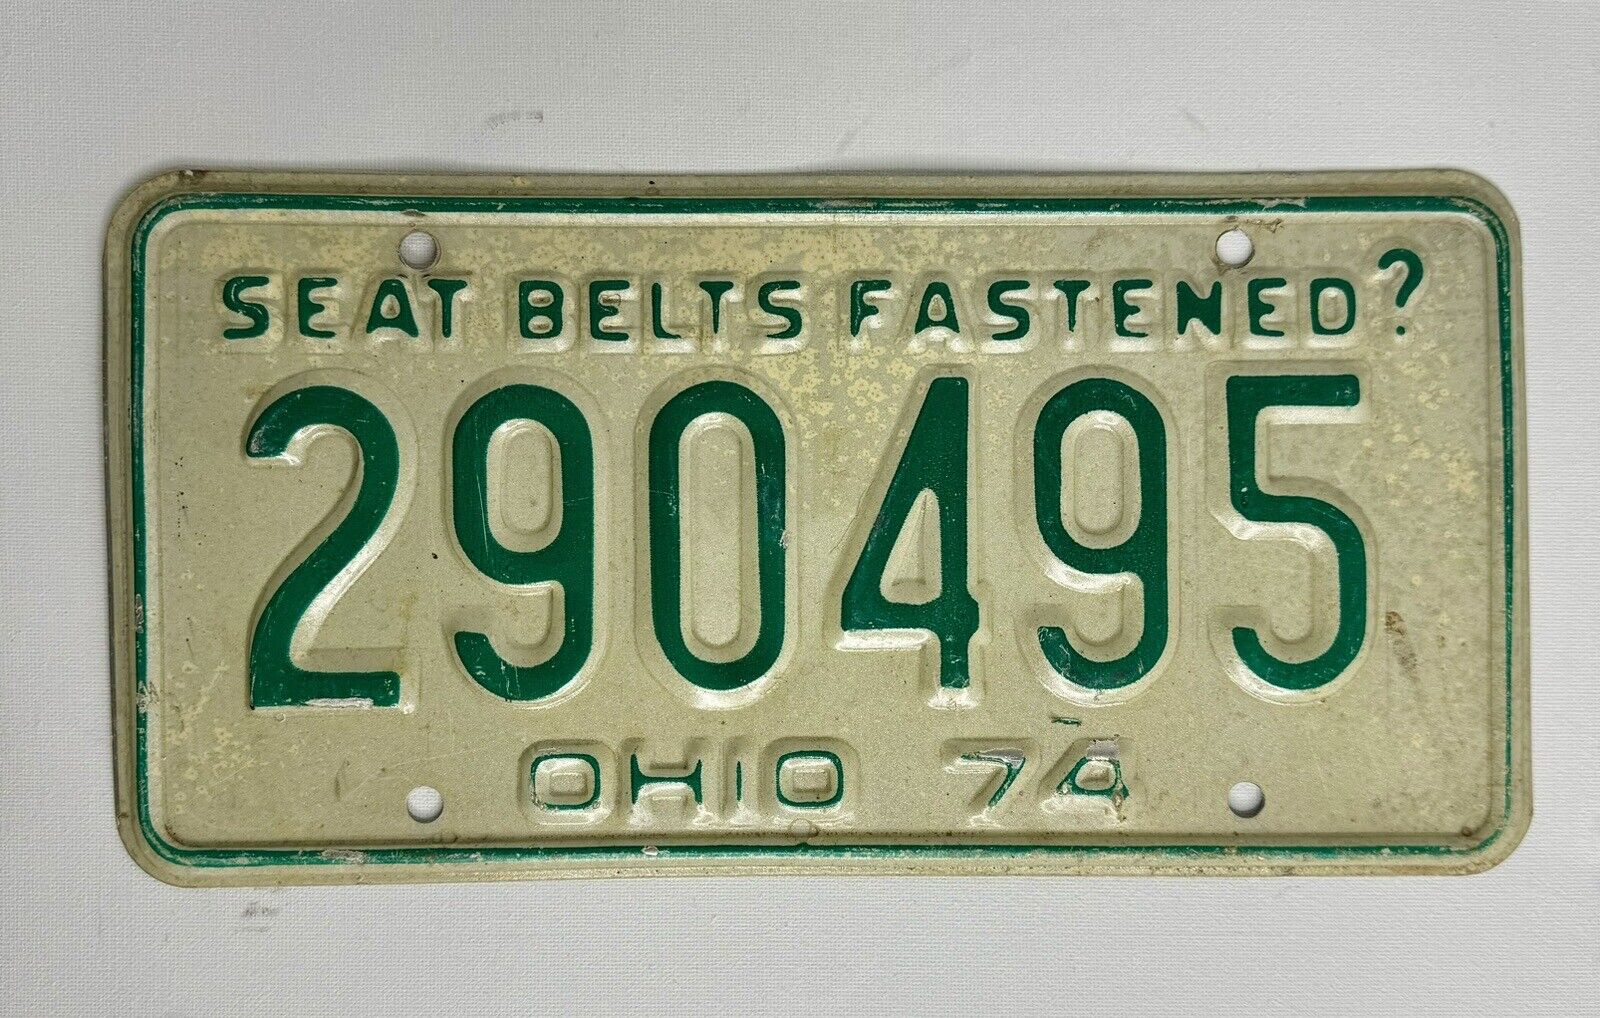 1974 Ohio License Plate 290495 Seat Belts Fastened?